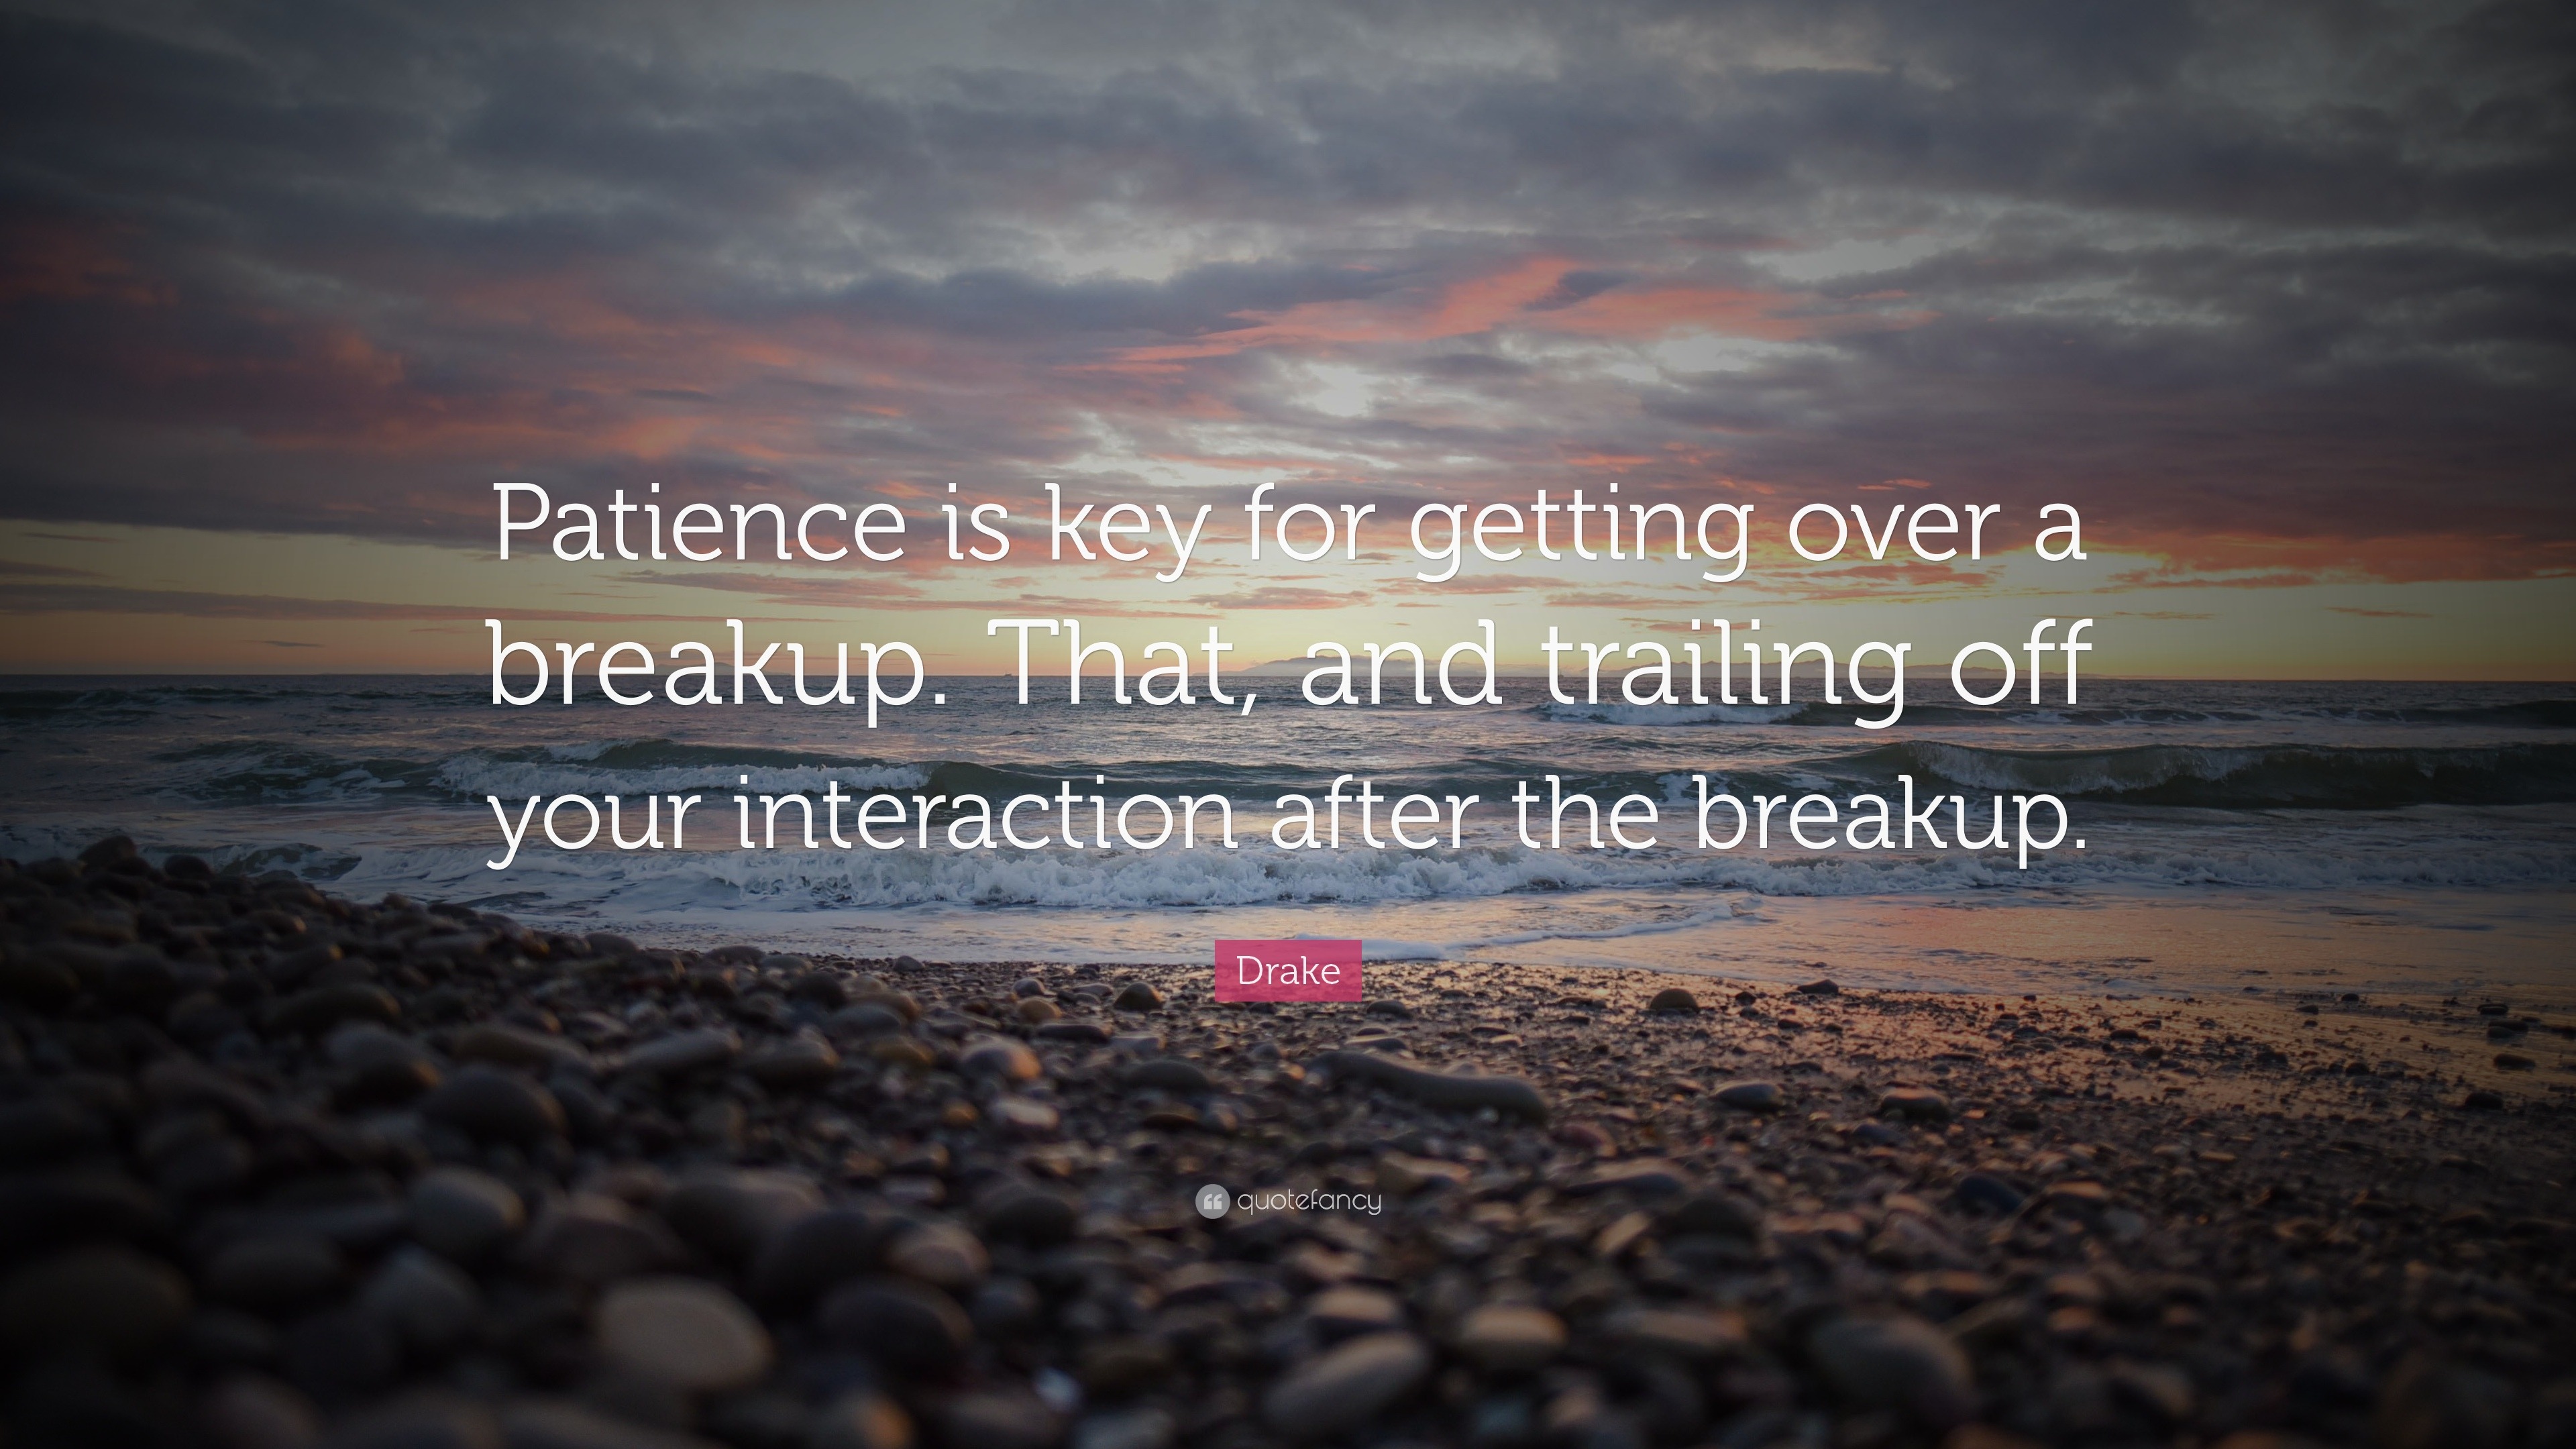 Drake Quote: “Patience is key for getting over a breakup. That, and  trailing off your interaction